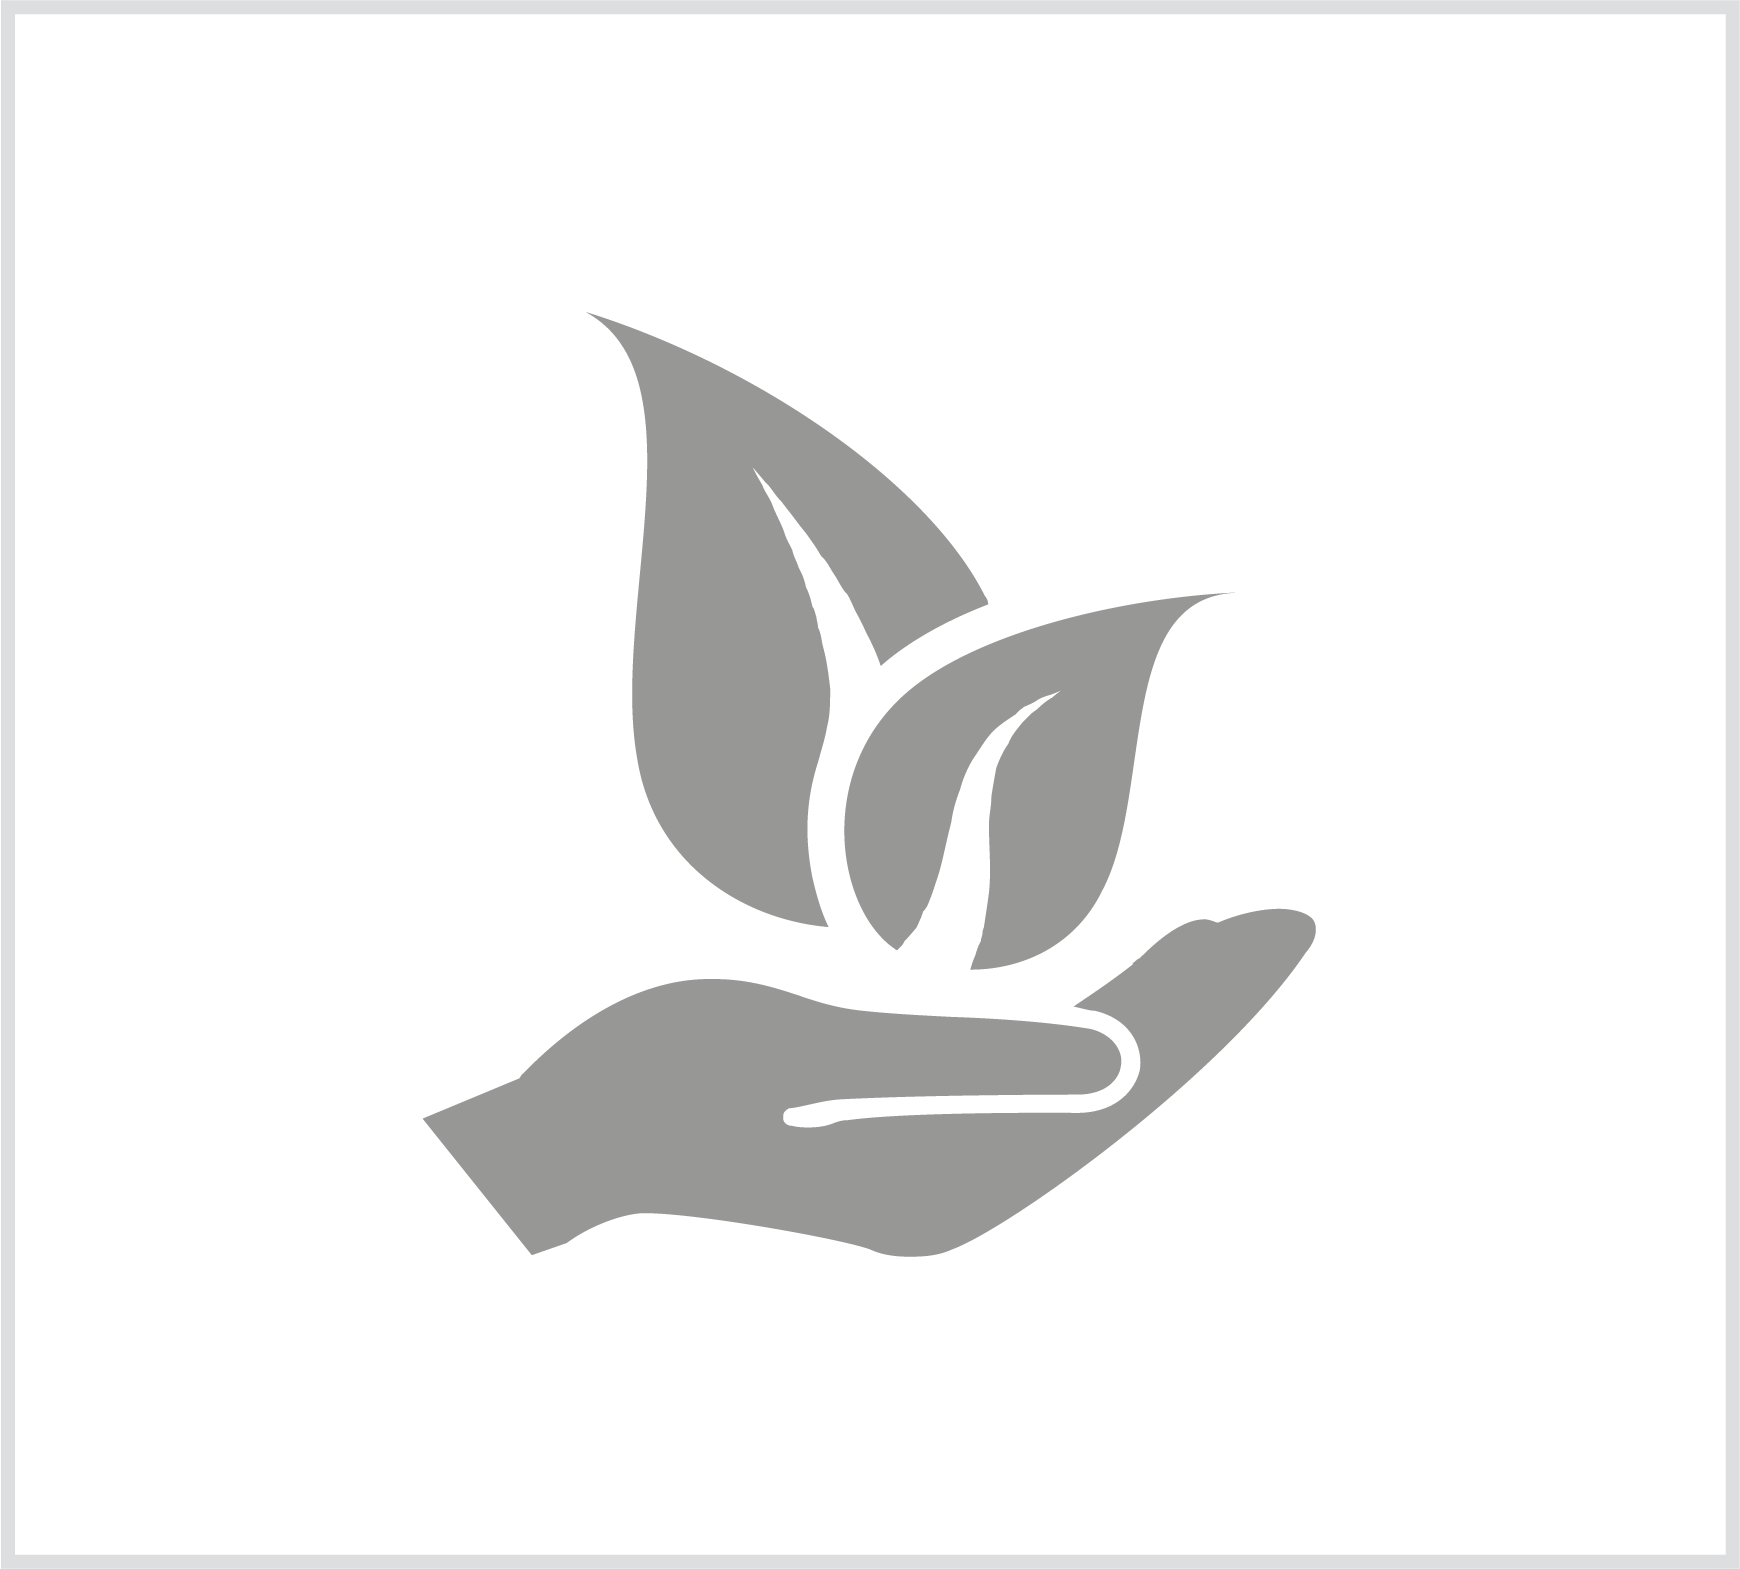 Leaf and hand icon